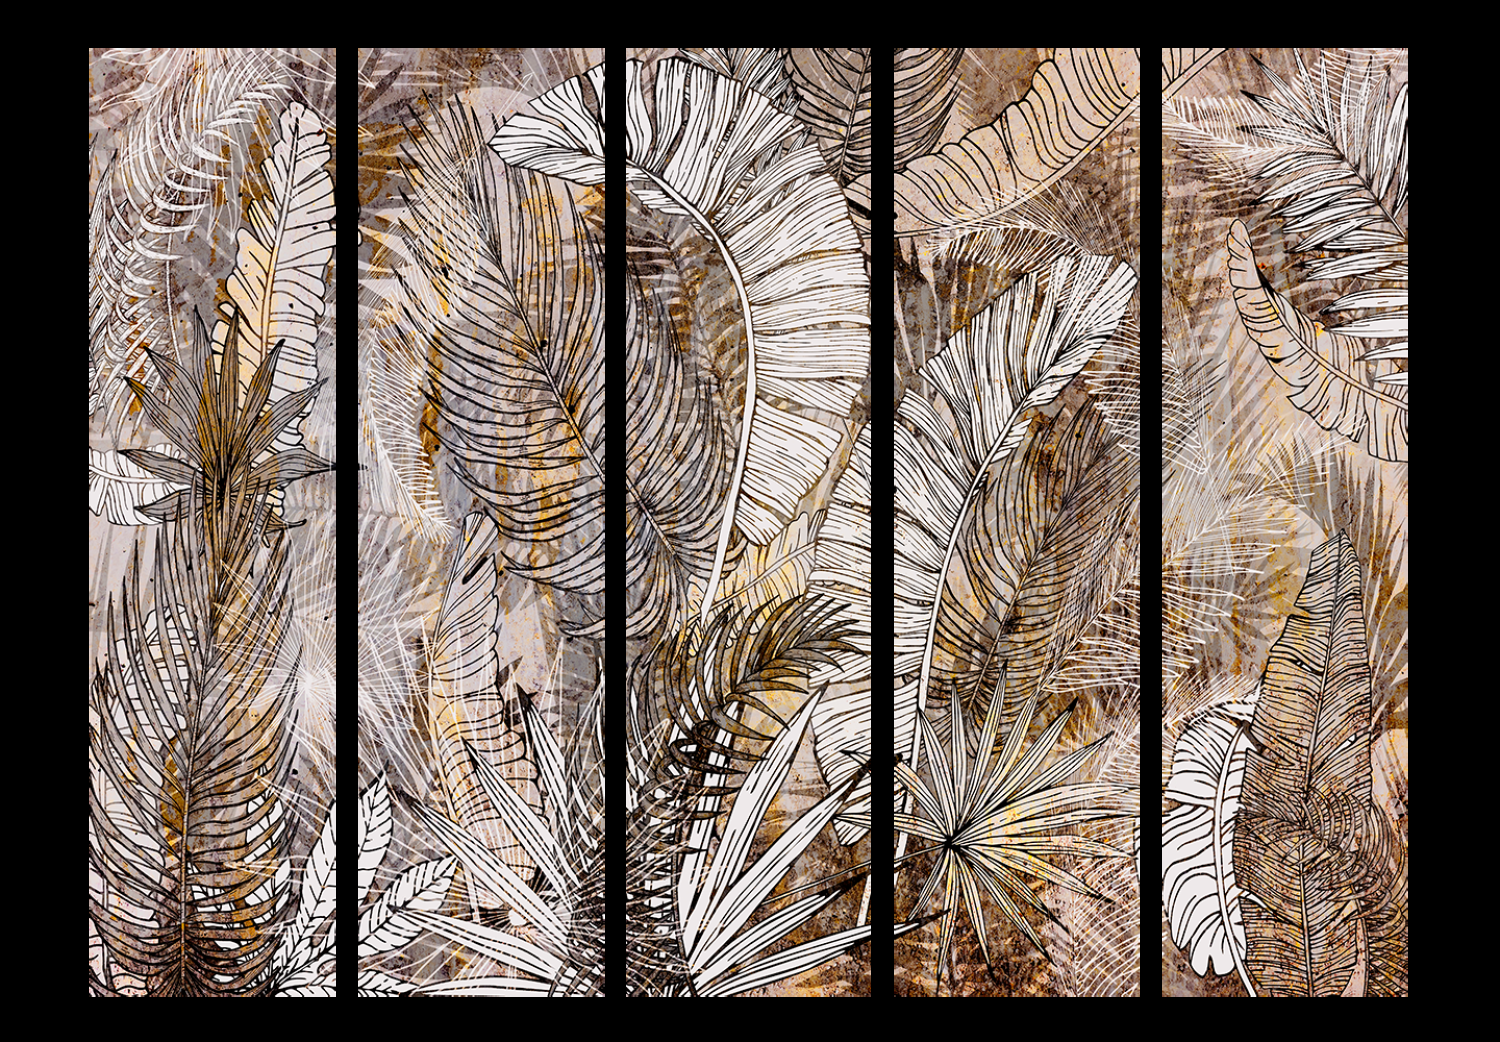 Room Divider Honeyed Plumage II (5-piece) - Composition of feathers and plants